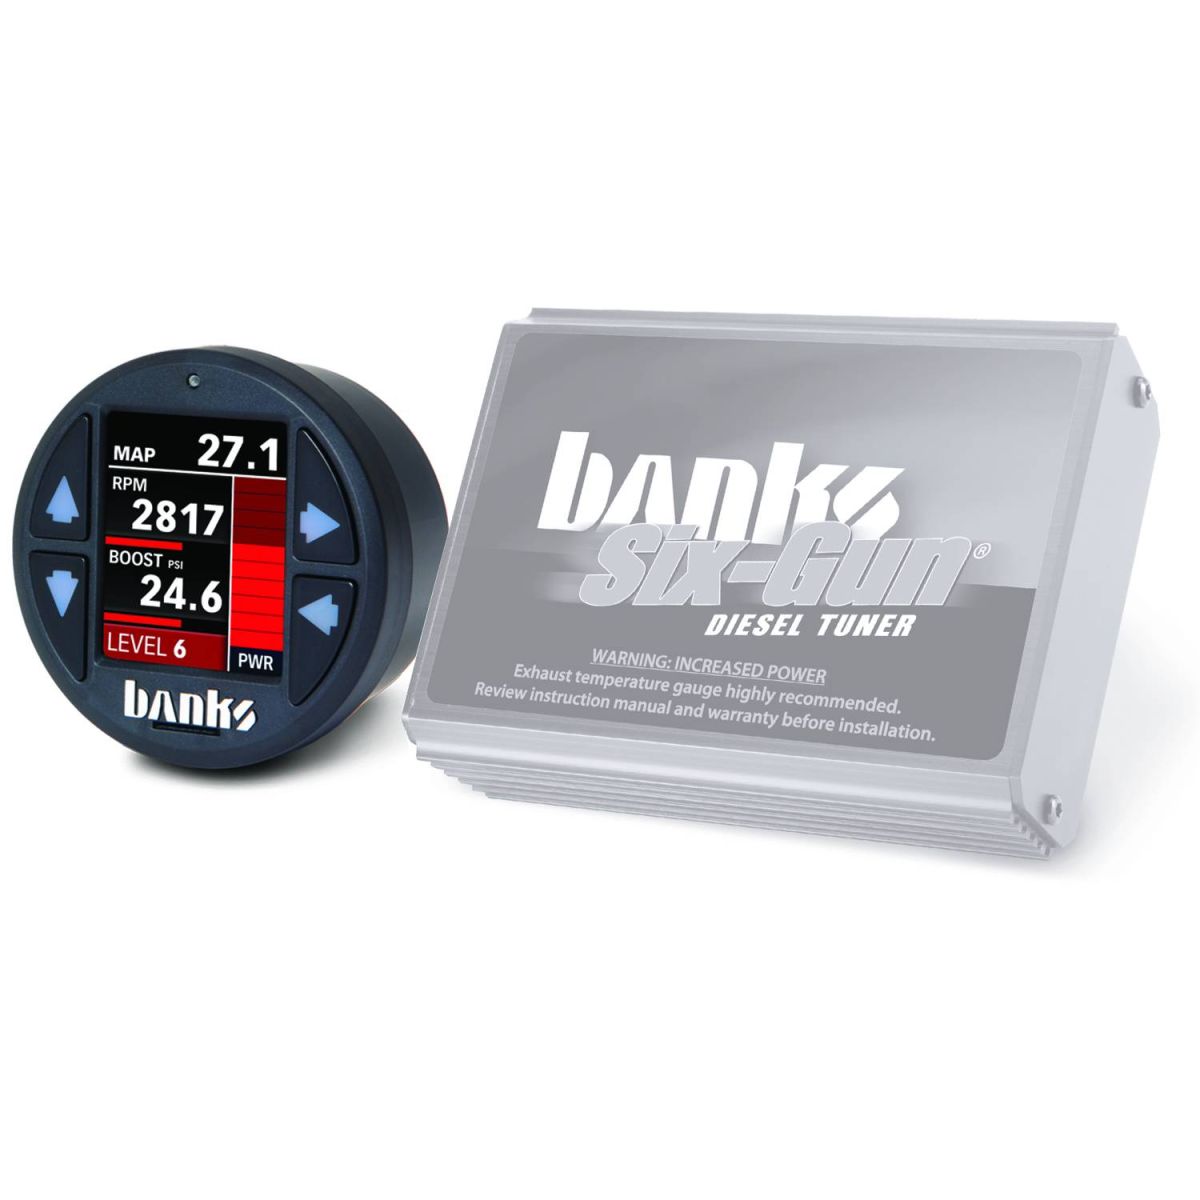 Banks Power - Banks Power Six-Gun Diesel Tuner with Banks iDash 1.8 Super Gauge for use with 2007-2010 Chevy 6.6L, LMM